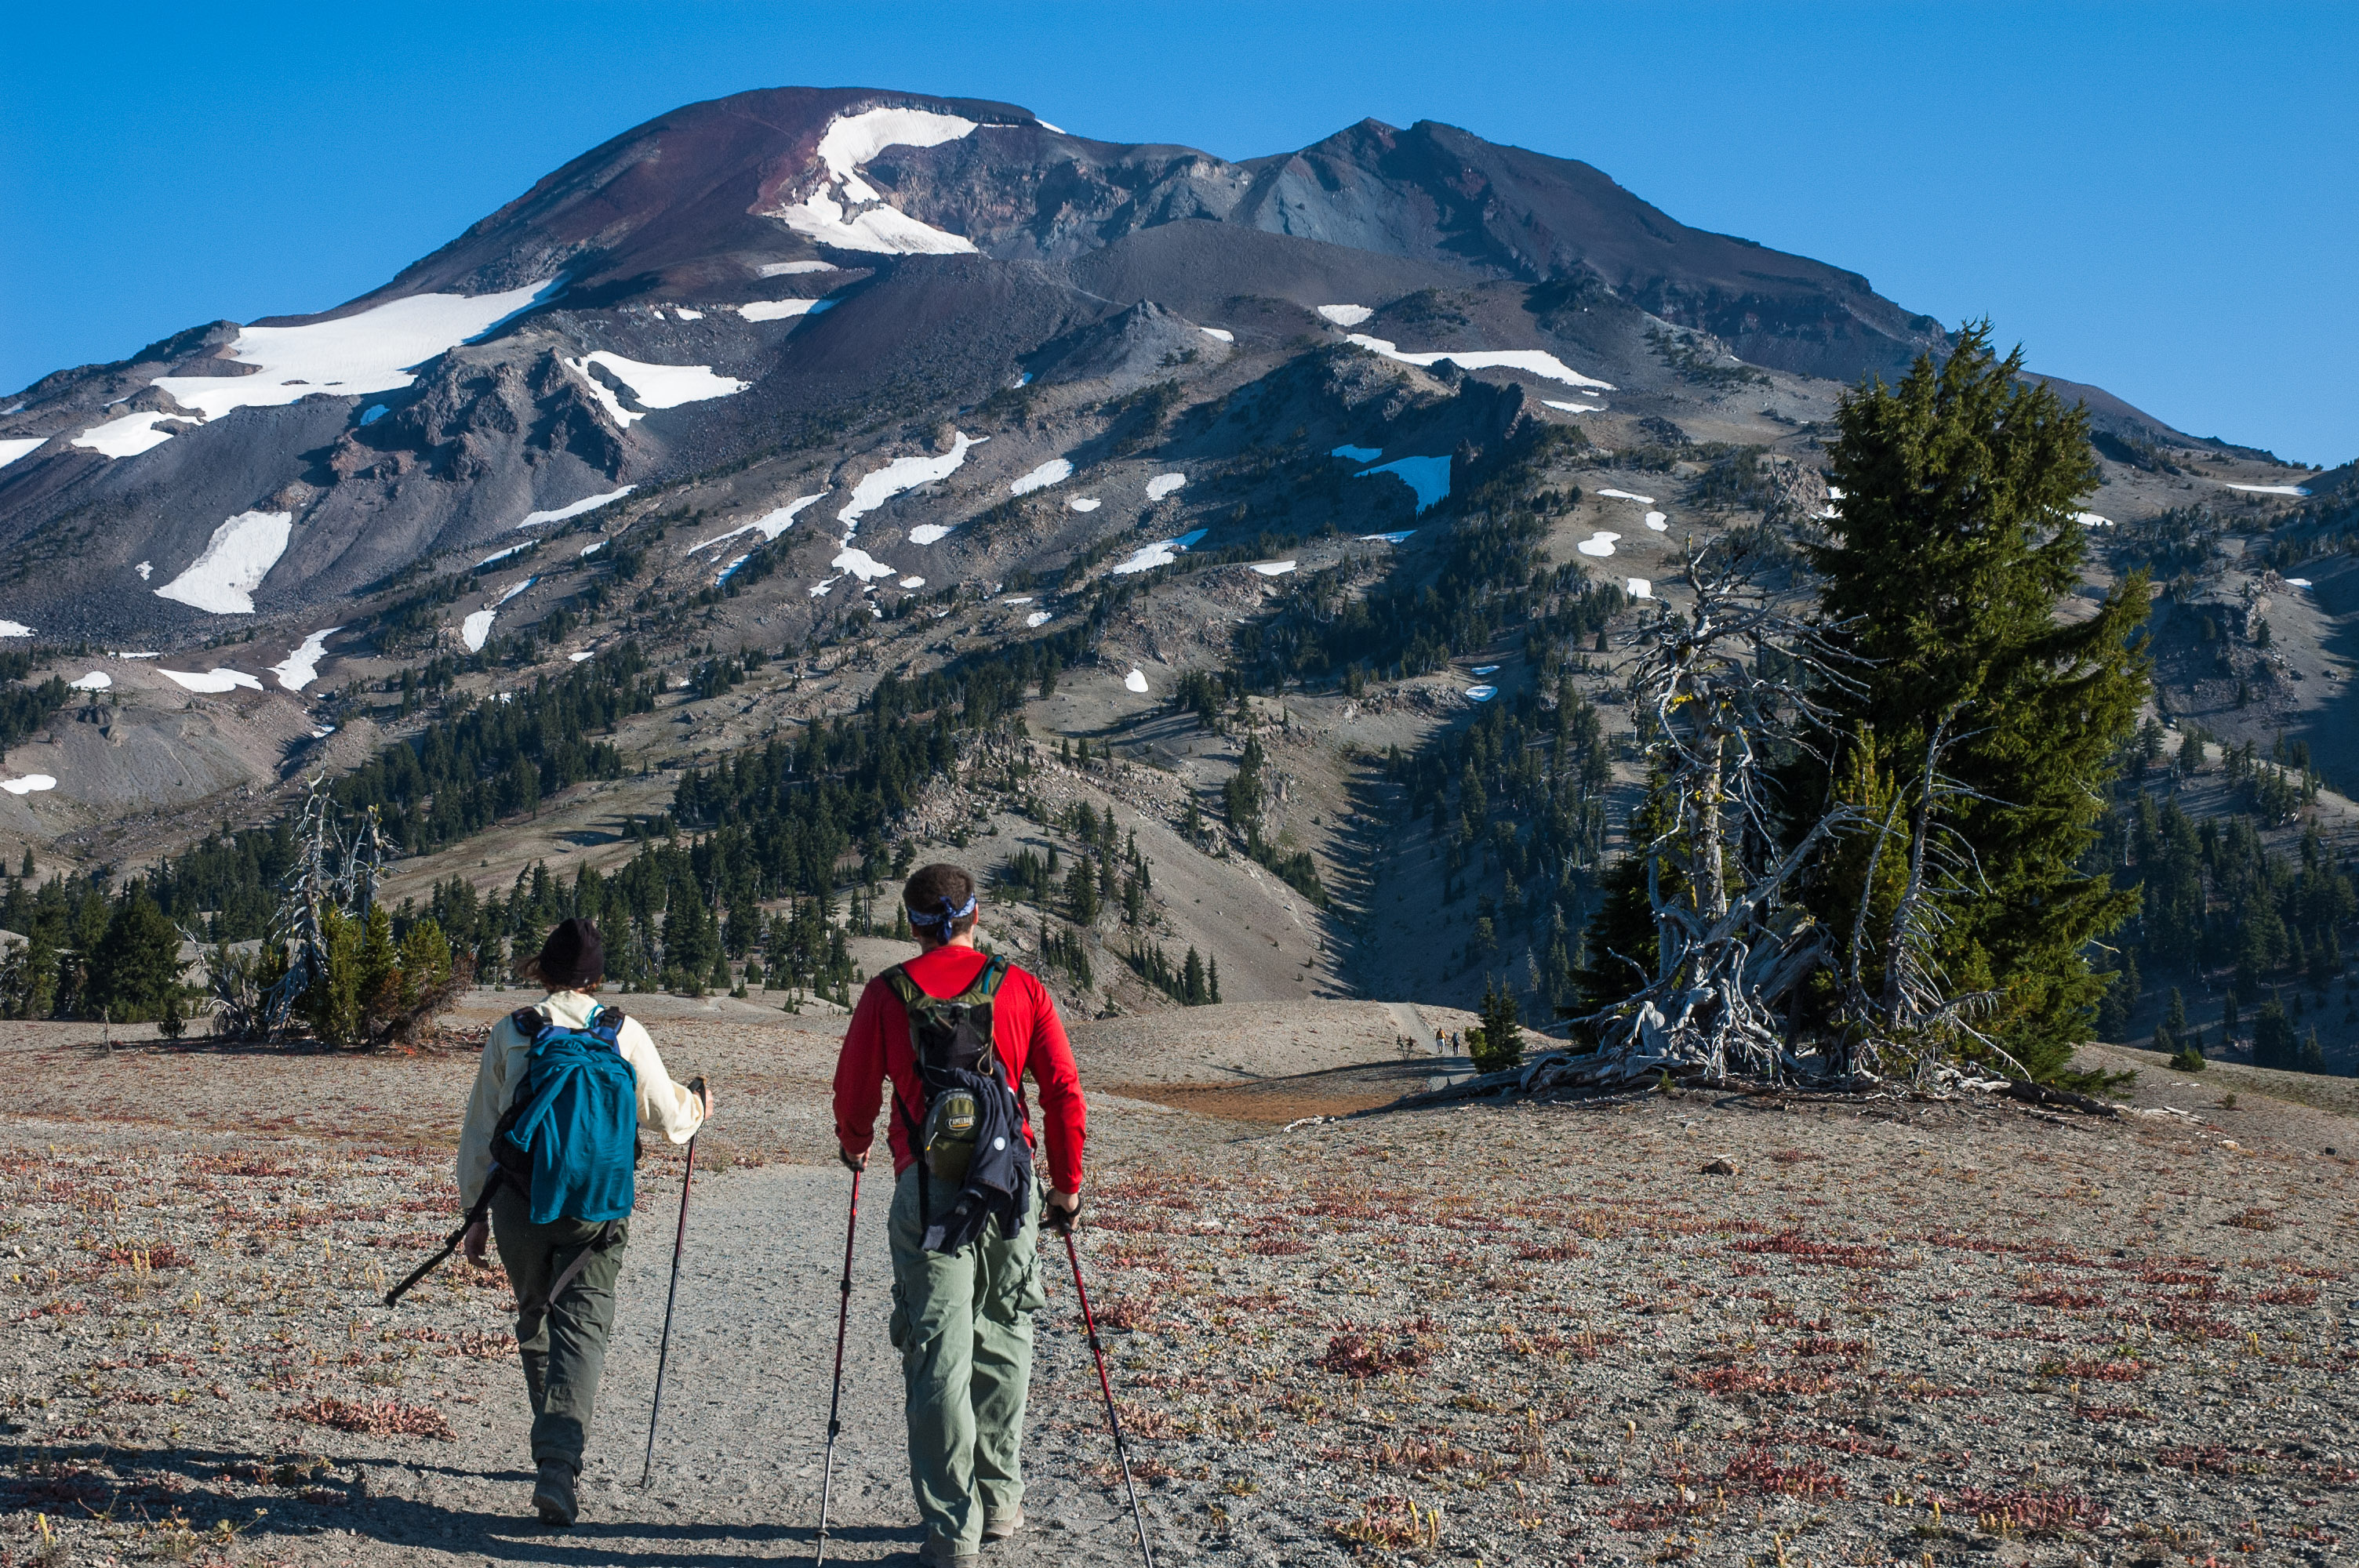 In search of subalpine native grasses, we're headed to the top of South Sister. Photo by Robert Korfhage.